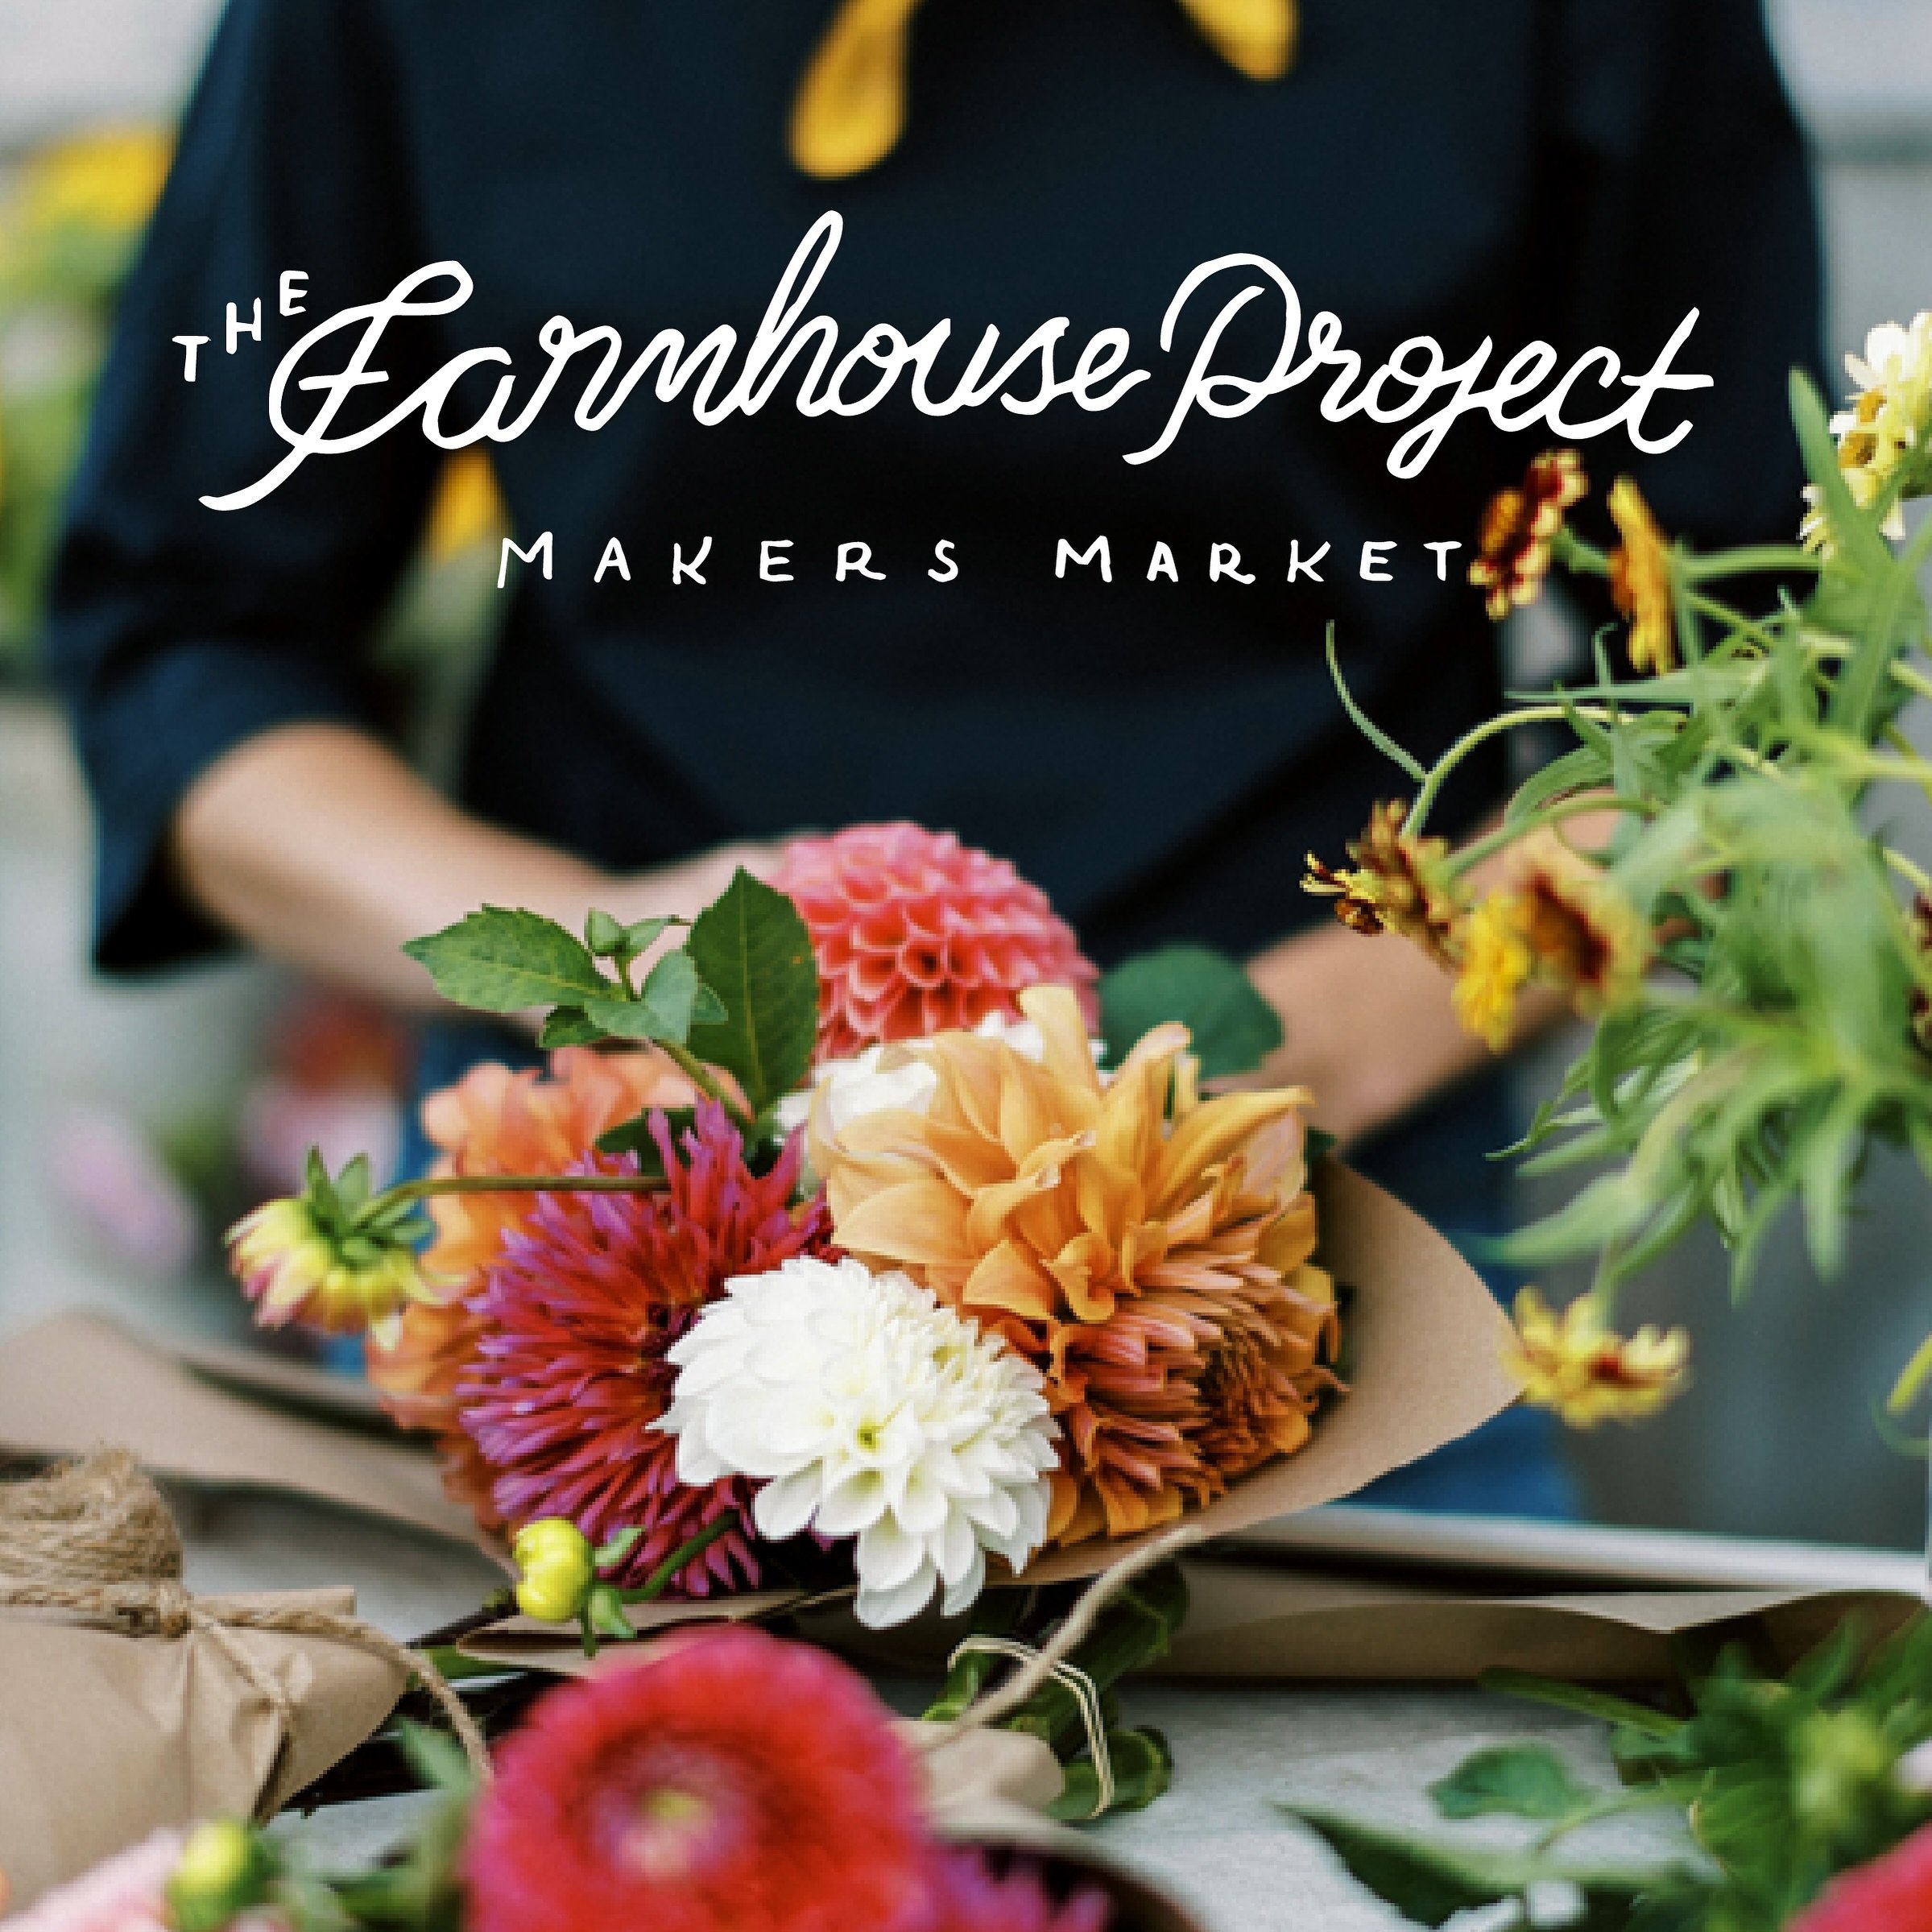 This coming weekend I will have the pleasure of rubbing elbows with dozens of talented makers at @thefarmhouseproject Makers Market in beautiful Callicoon, NY.

Stop by and check out the incredible artisanal wares while you enjoy great food and the o